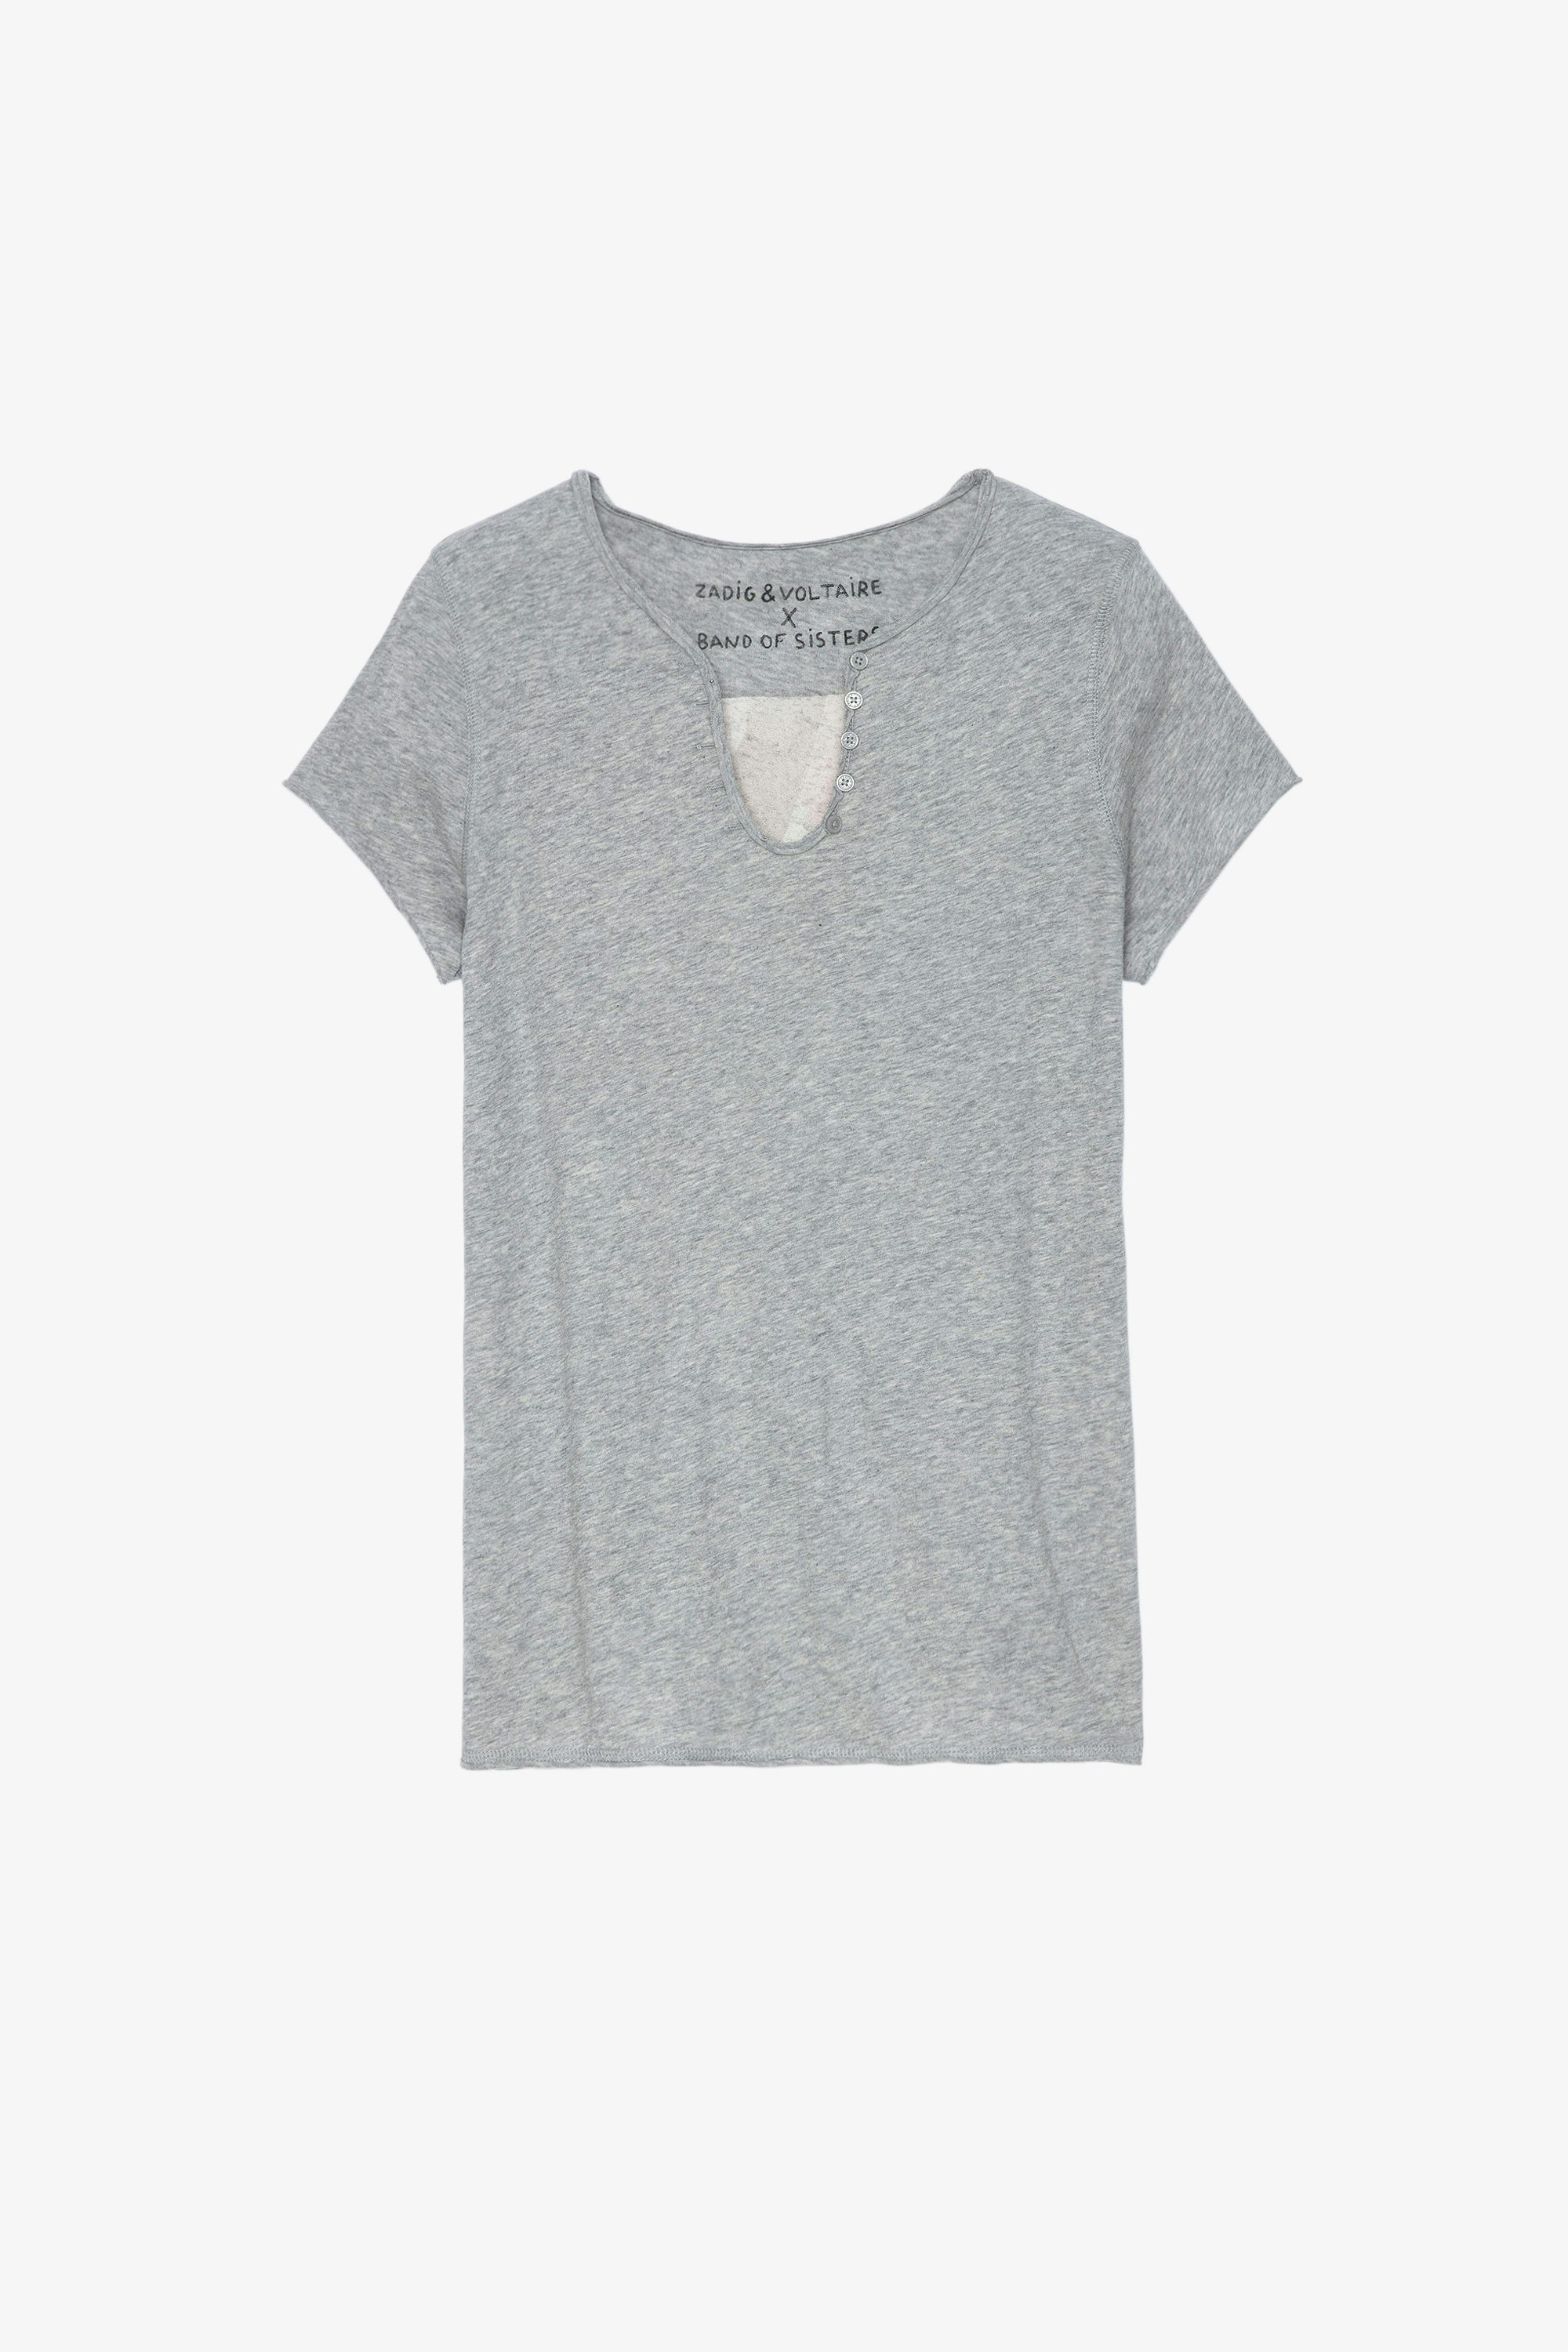 Band of Sisters Henley Ｔシャツ Women’s grey marl cotton T-shirt with Henley collar and Band of Sisters print